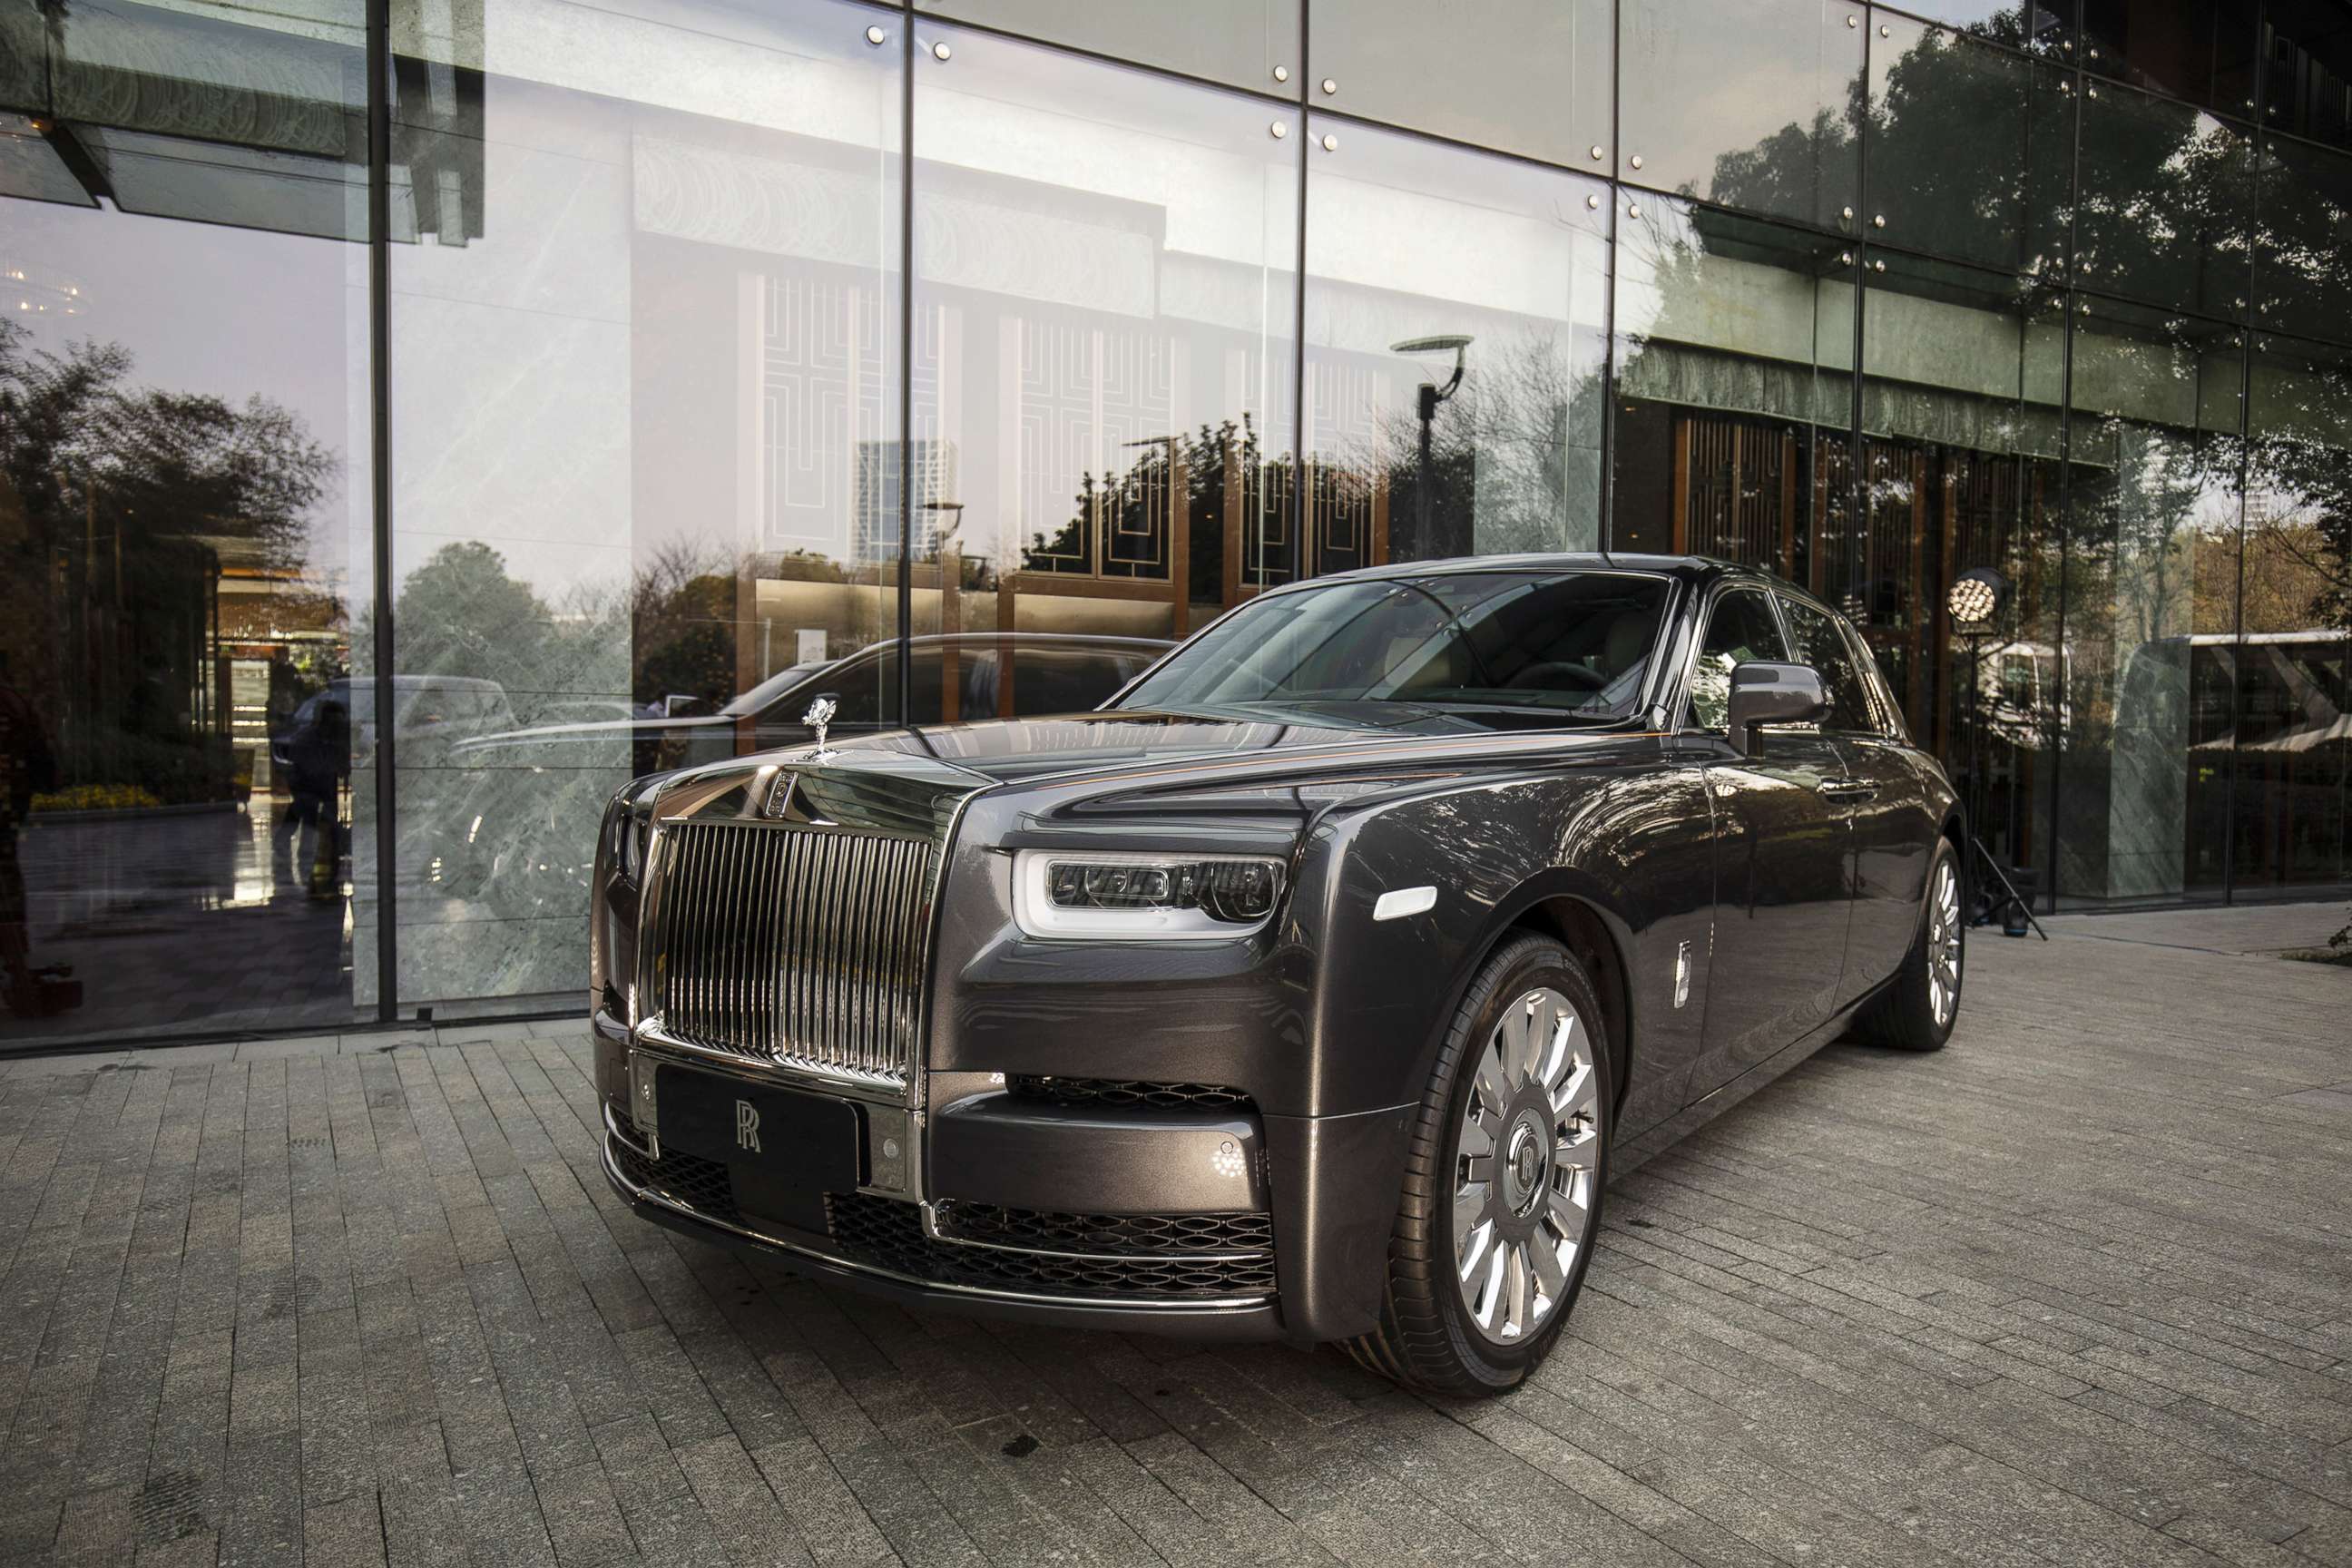 PHOTO: A Rolls-Royce Motor Cars Ltd. Phantom automobile sits on display in front of the Mandarin Oriental Hotel in Shanghai, China, March 20, 2019. 